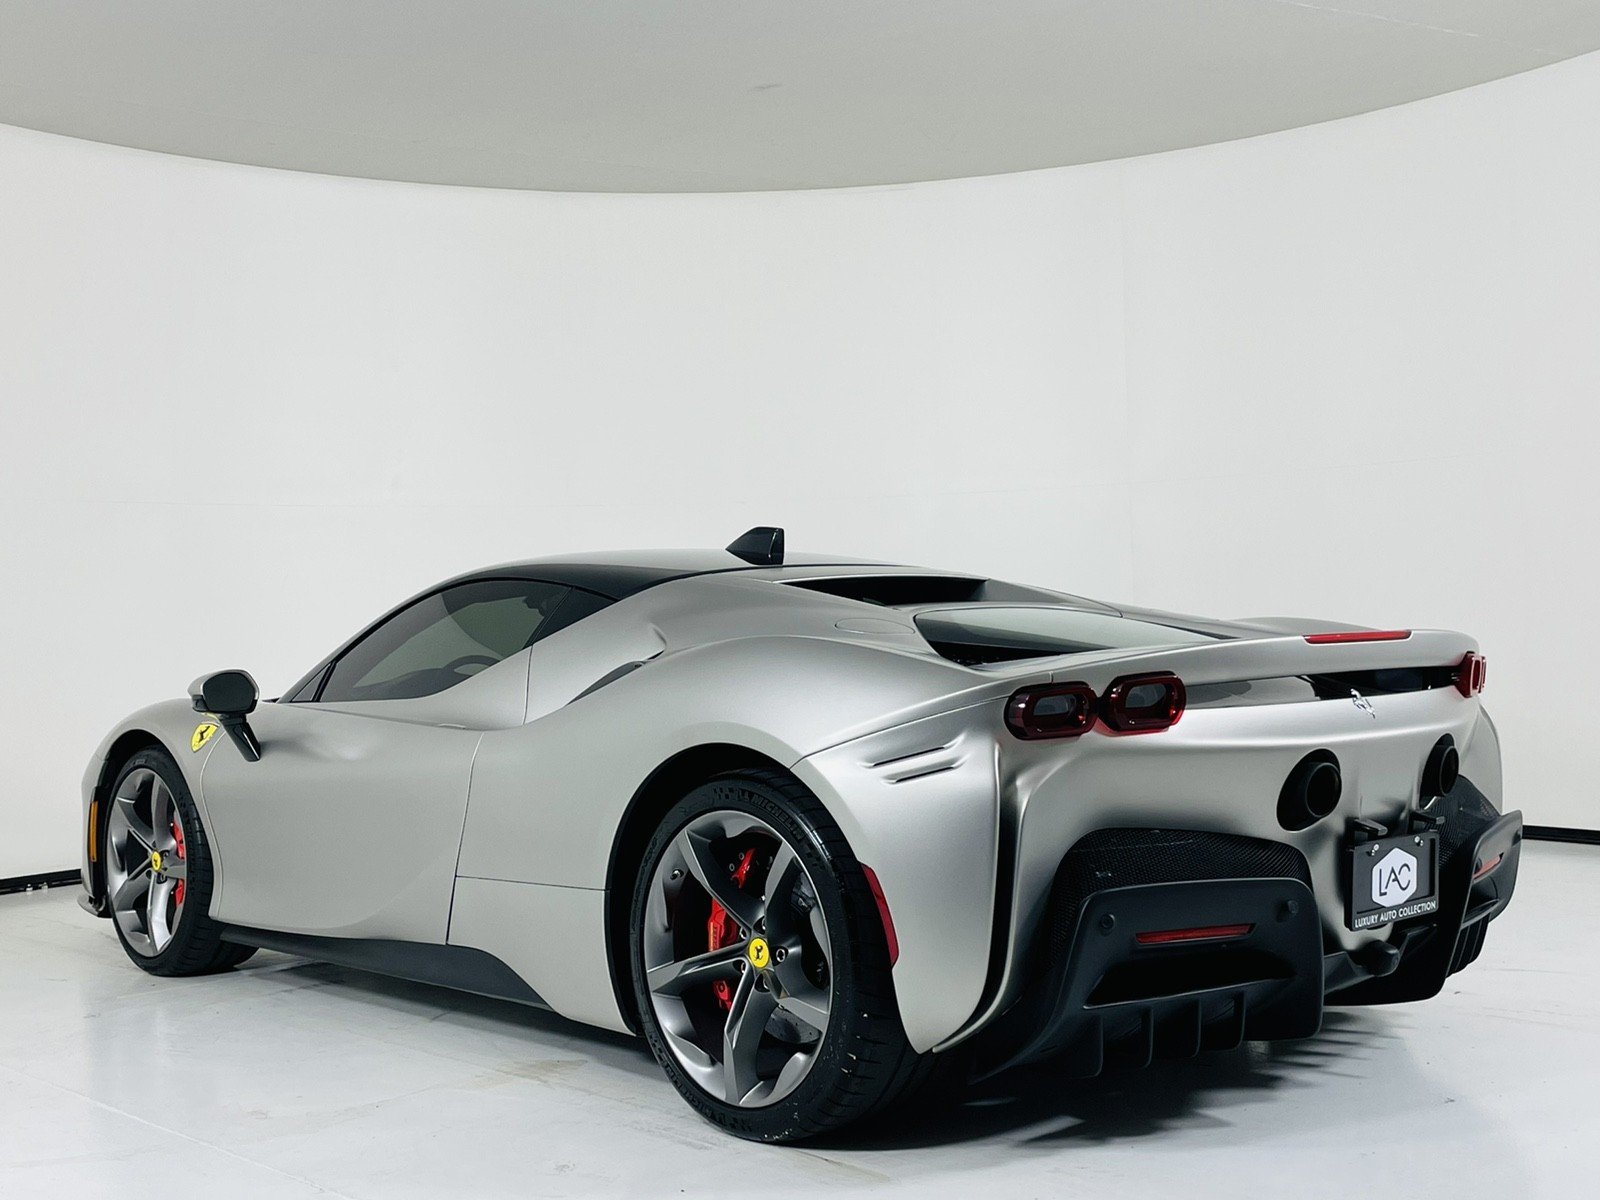 USED 2021 FERRARI SF90 STRADALE COUPE W A 650K MSRP FOR SALE (11)